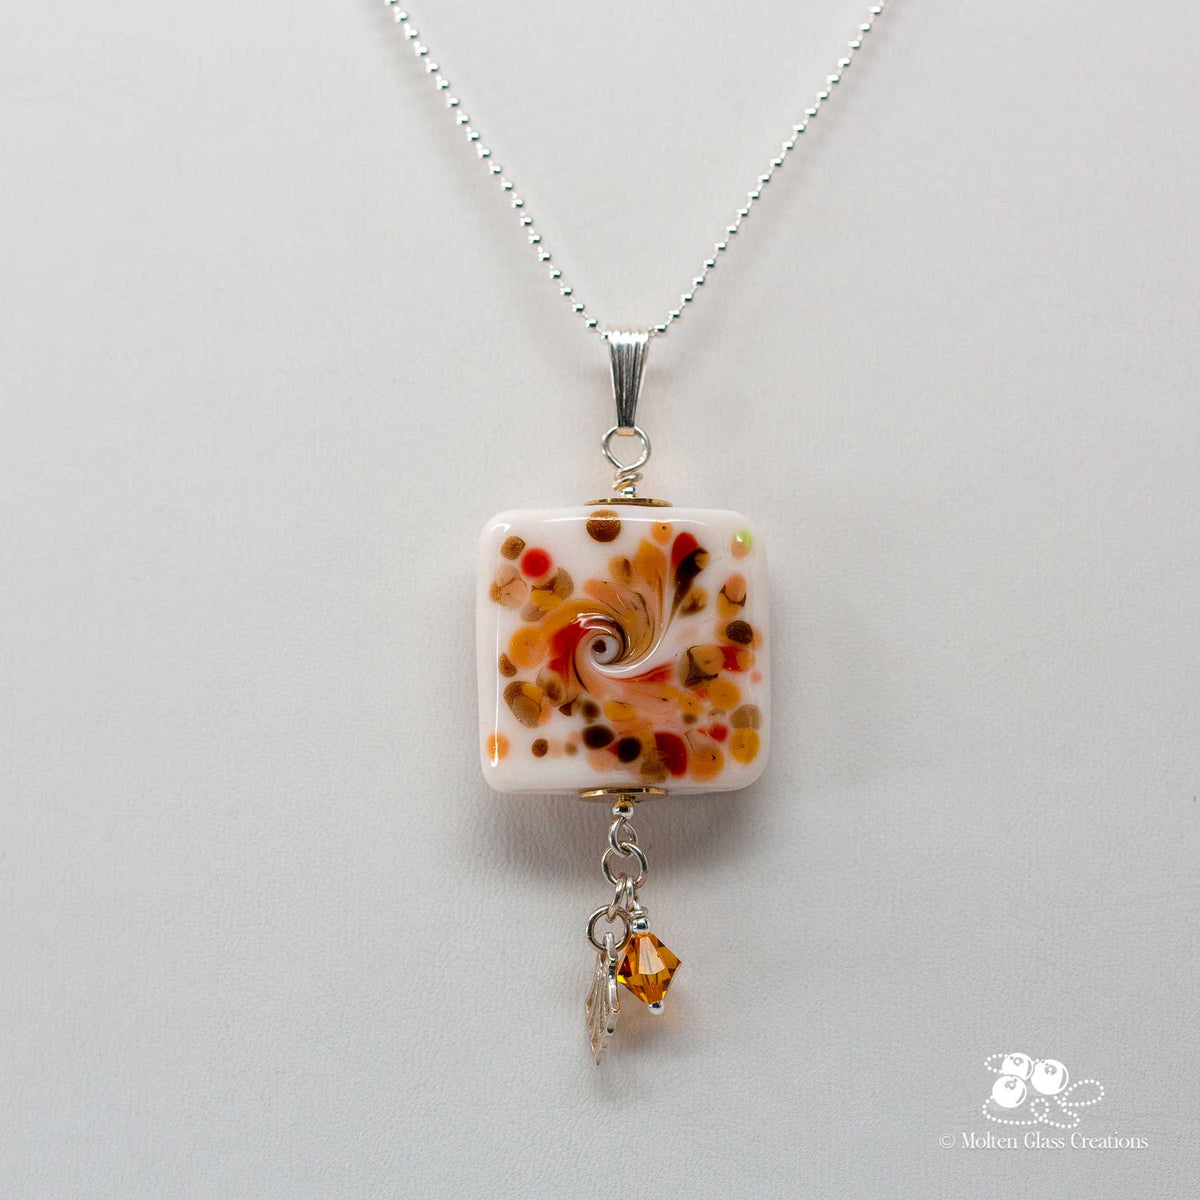 Fall Colours Tab Necklace - Molten Glass Creations